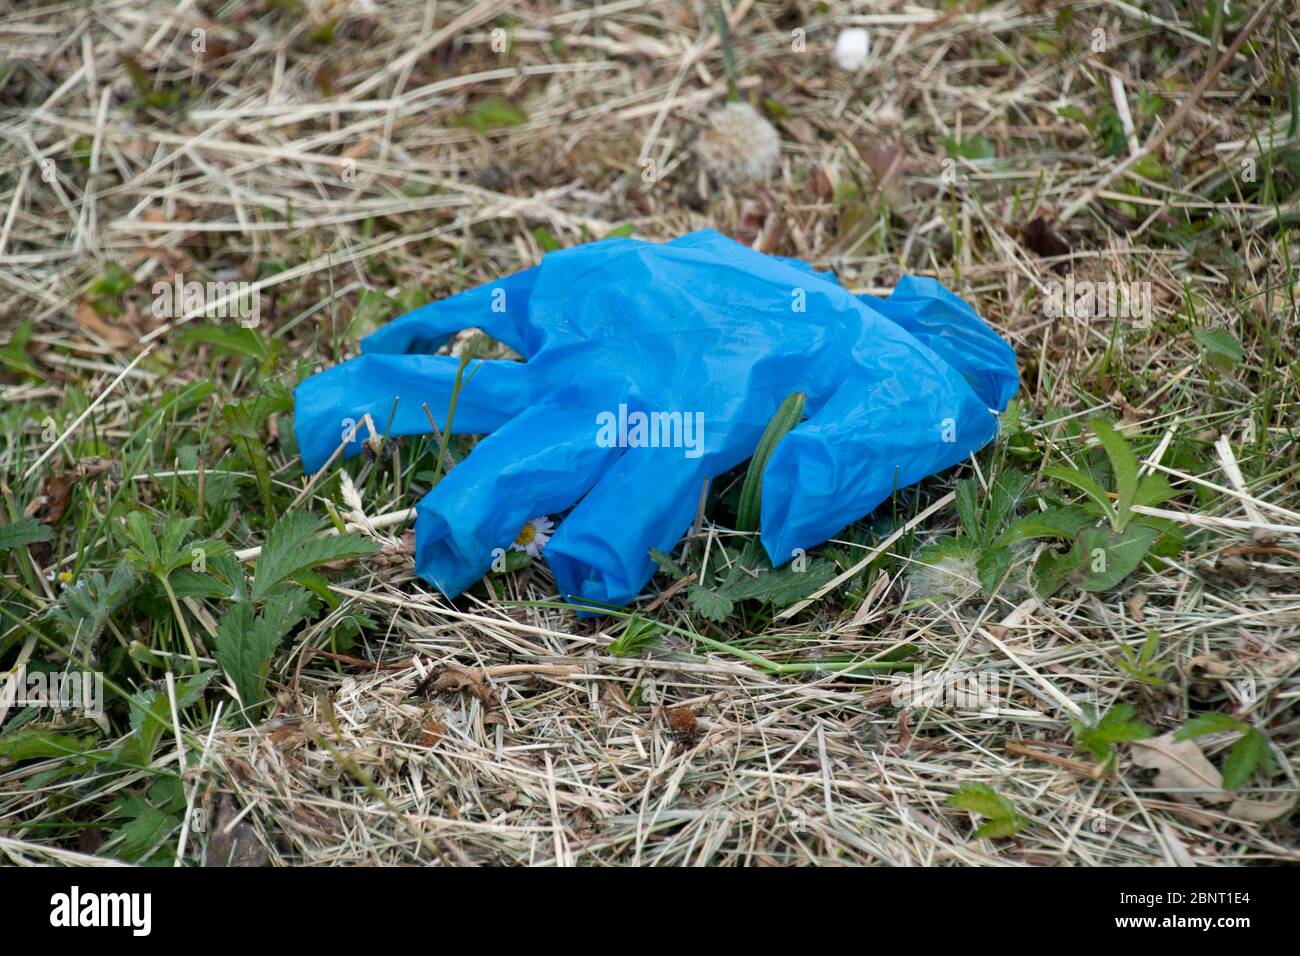 Sheffield UK –  May 13 2020: abandoned blue rubber glove discarded on the floor, protective PPE becomes litter during  the coronavirus Covid-19 pandem Stock Photo